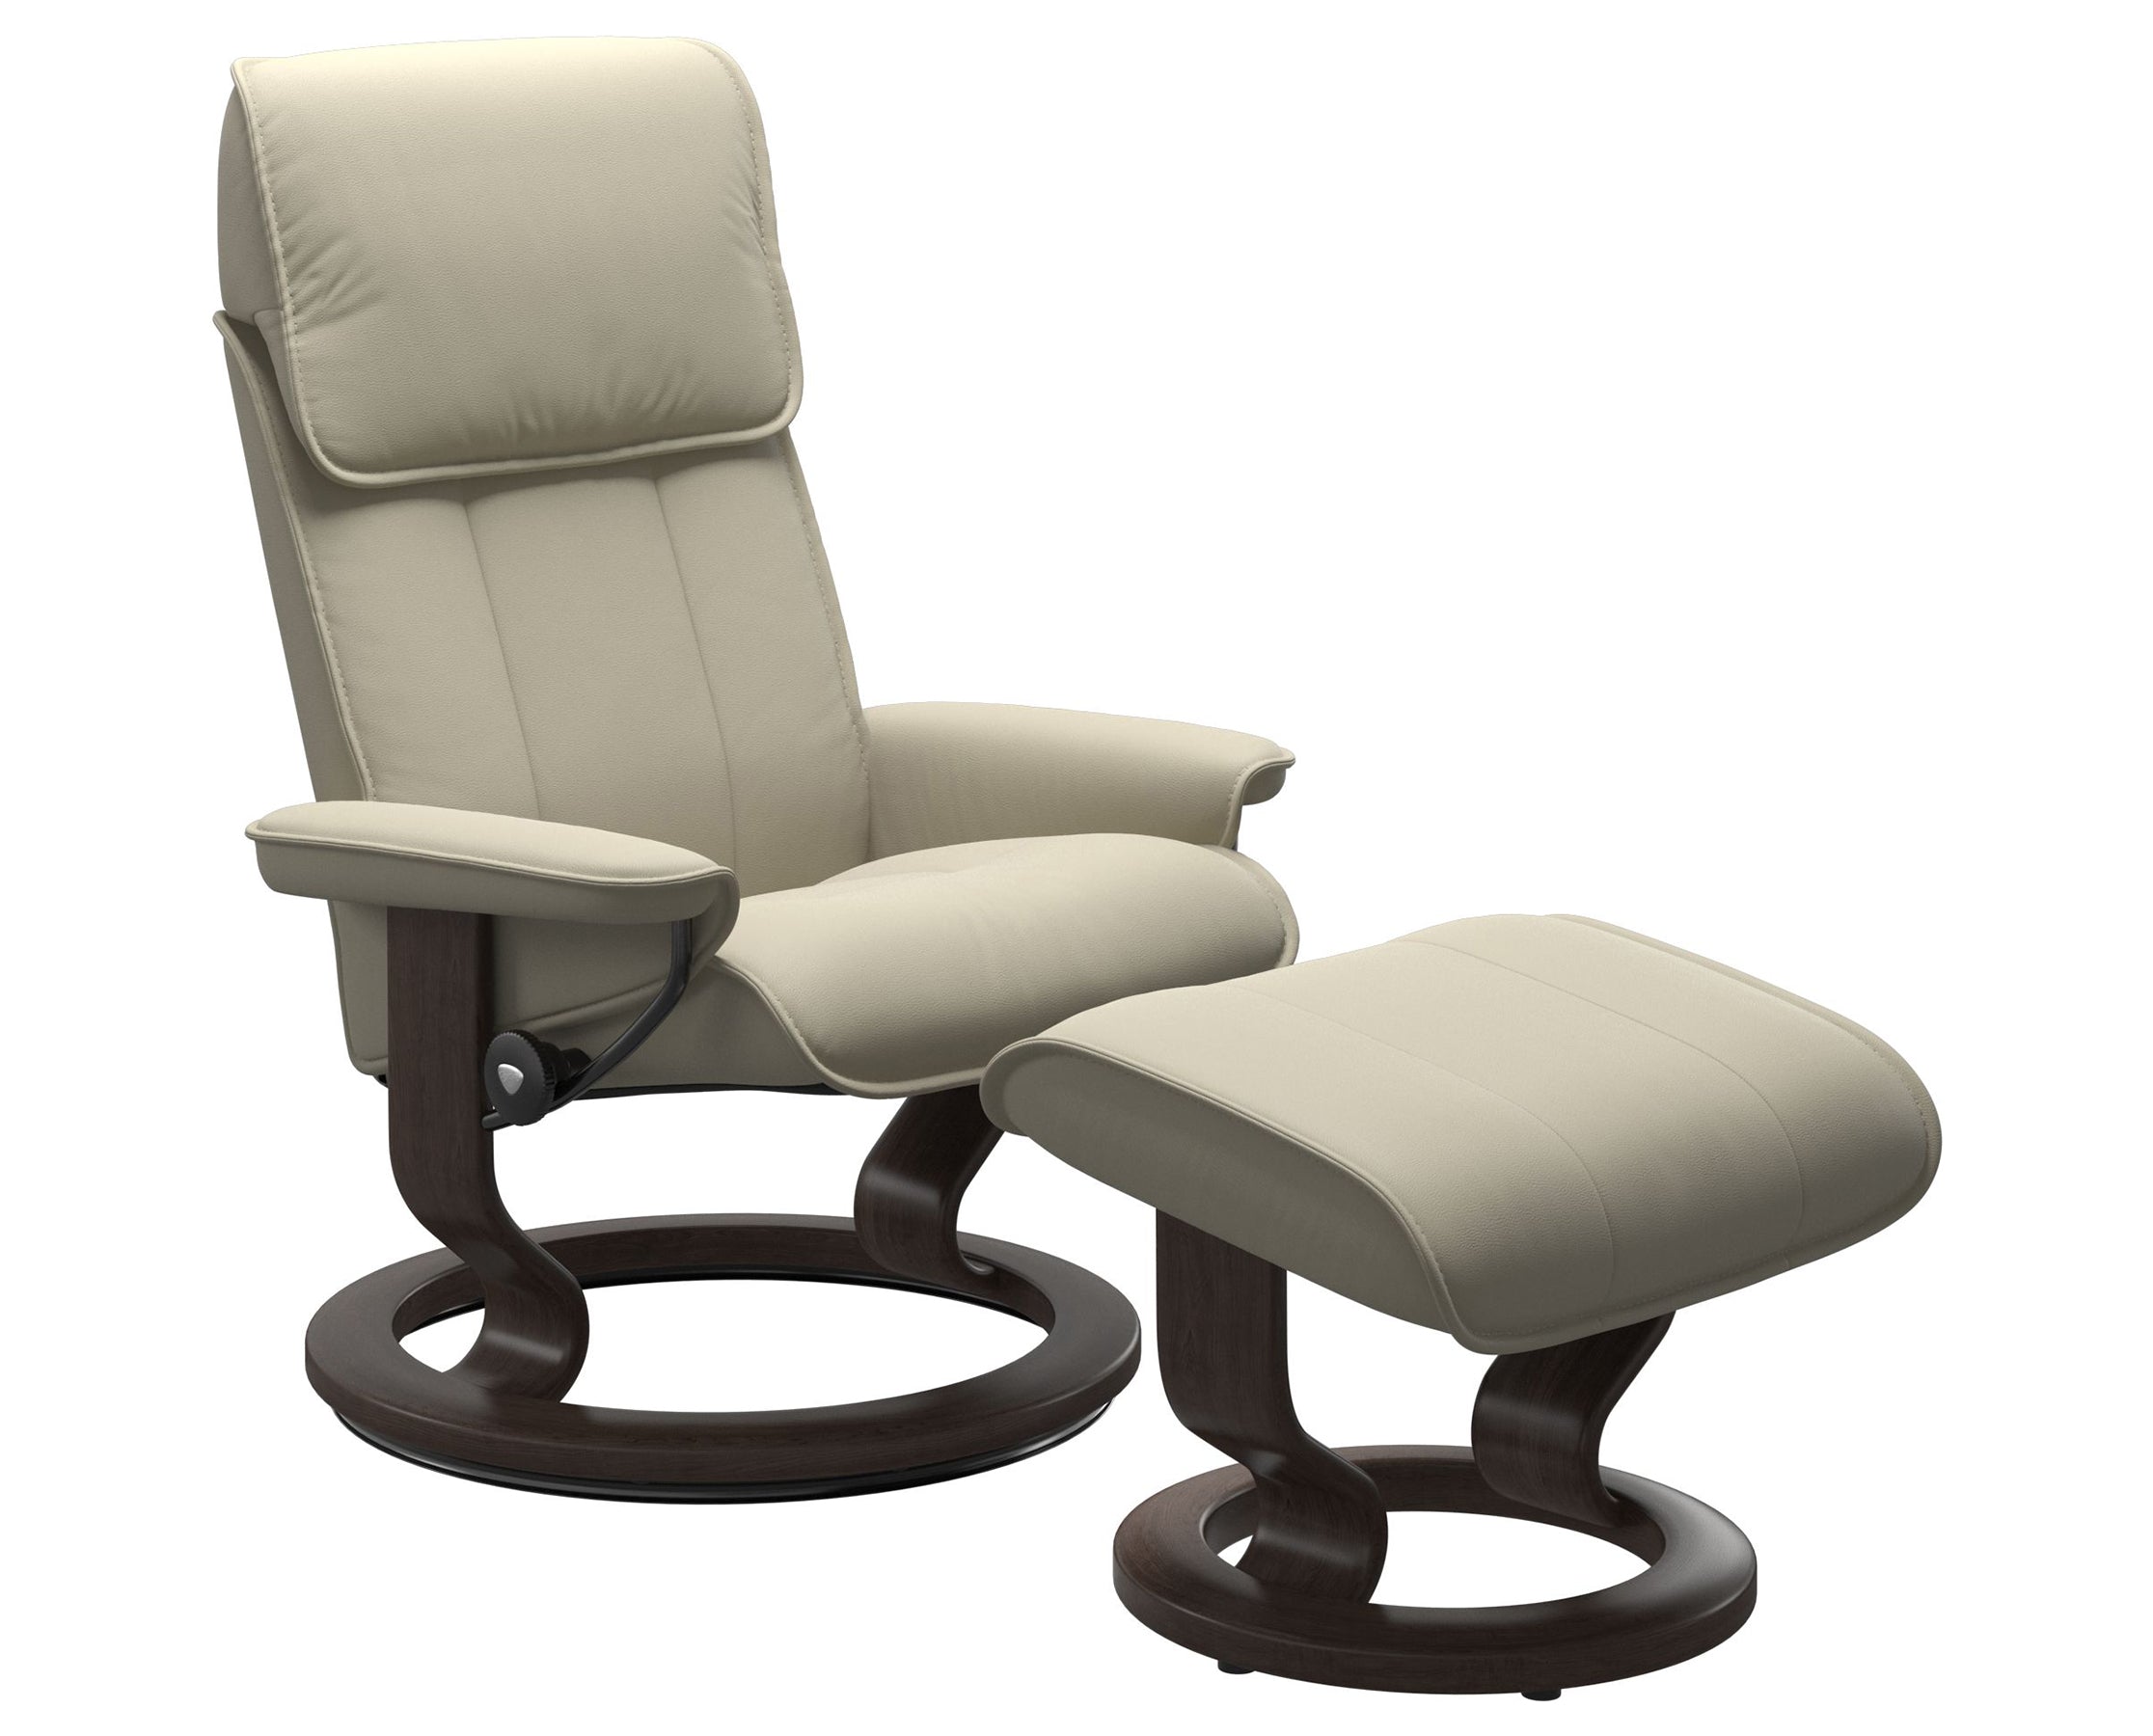 Paloma Leather Light Grey M/L and Wenge Base | Stressless Admiral Classic Recliner | Valley Ridge Furniture